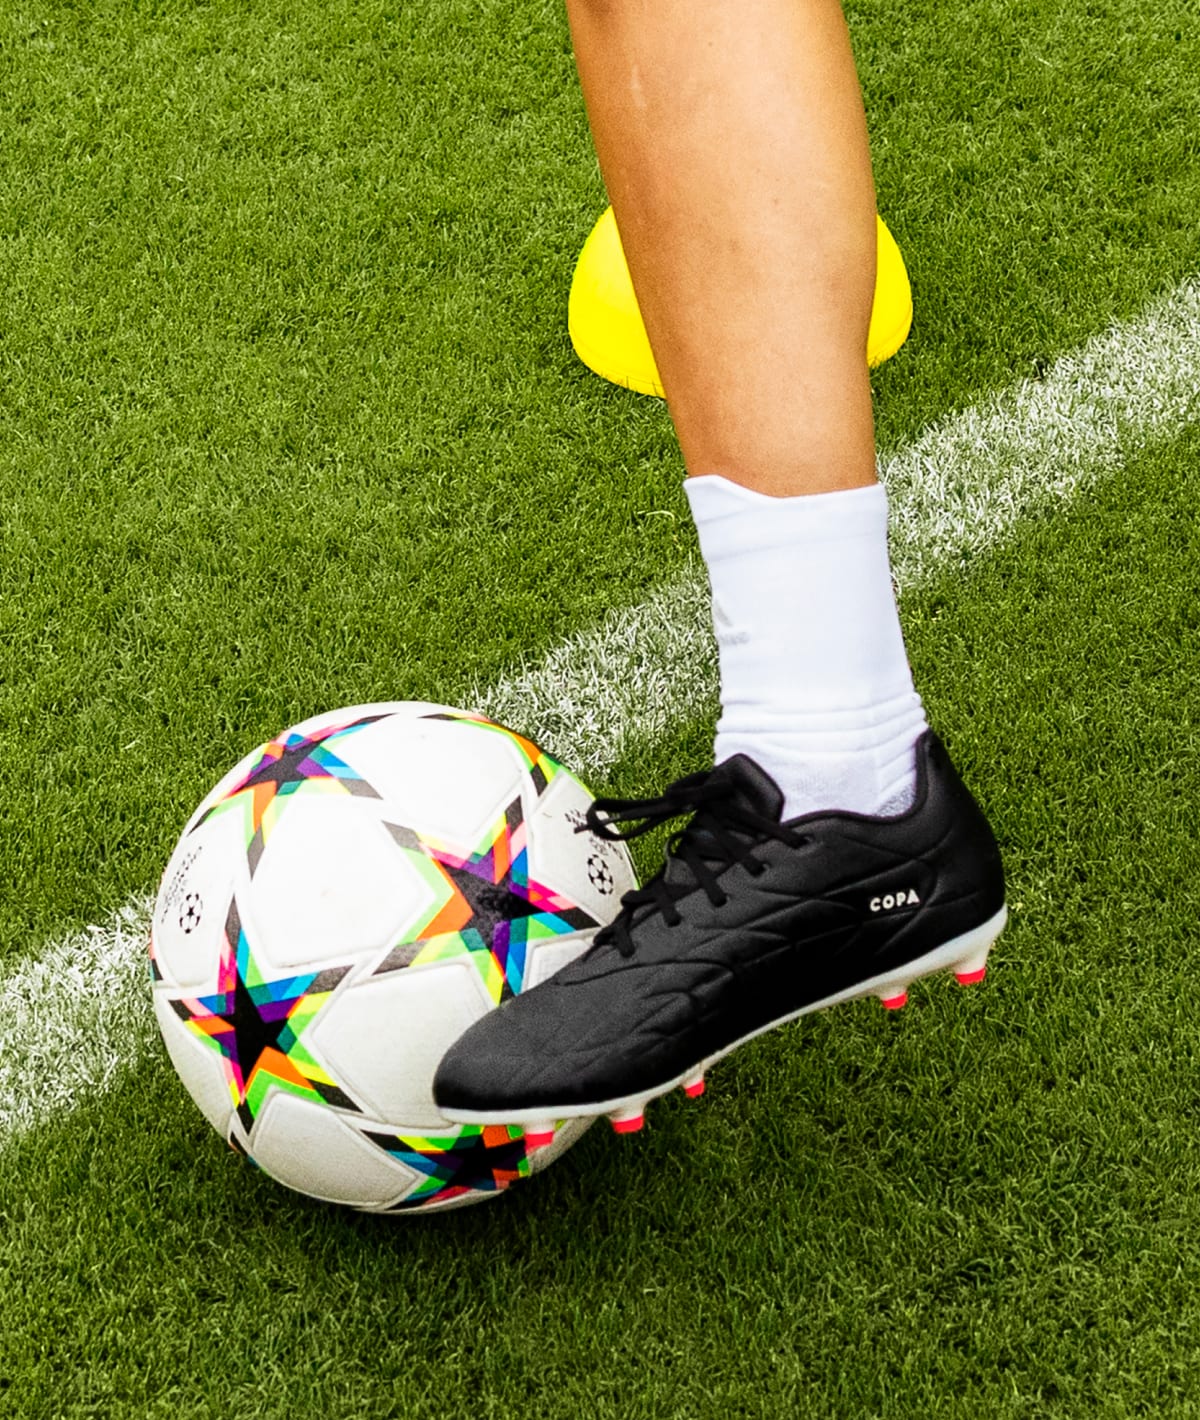 How Buy Soccer Cleats: Fit, Features, Field Surface